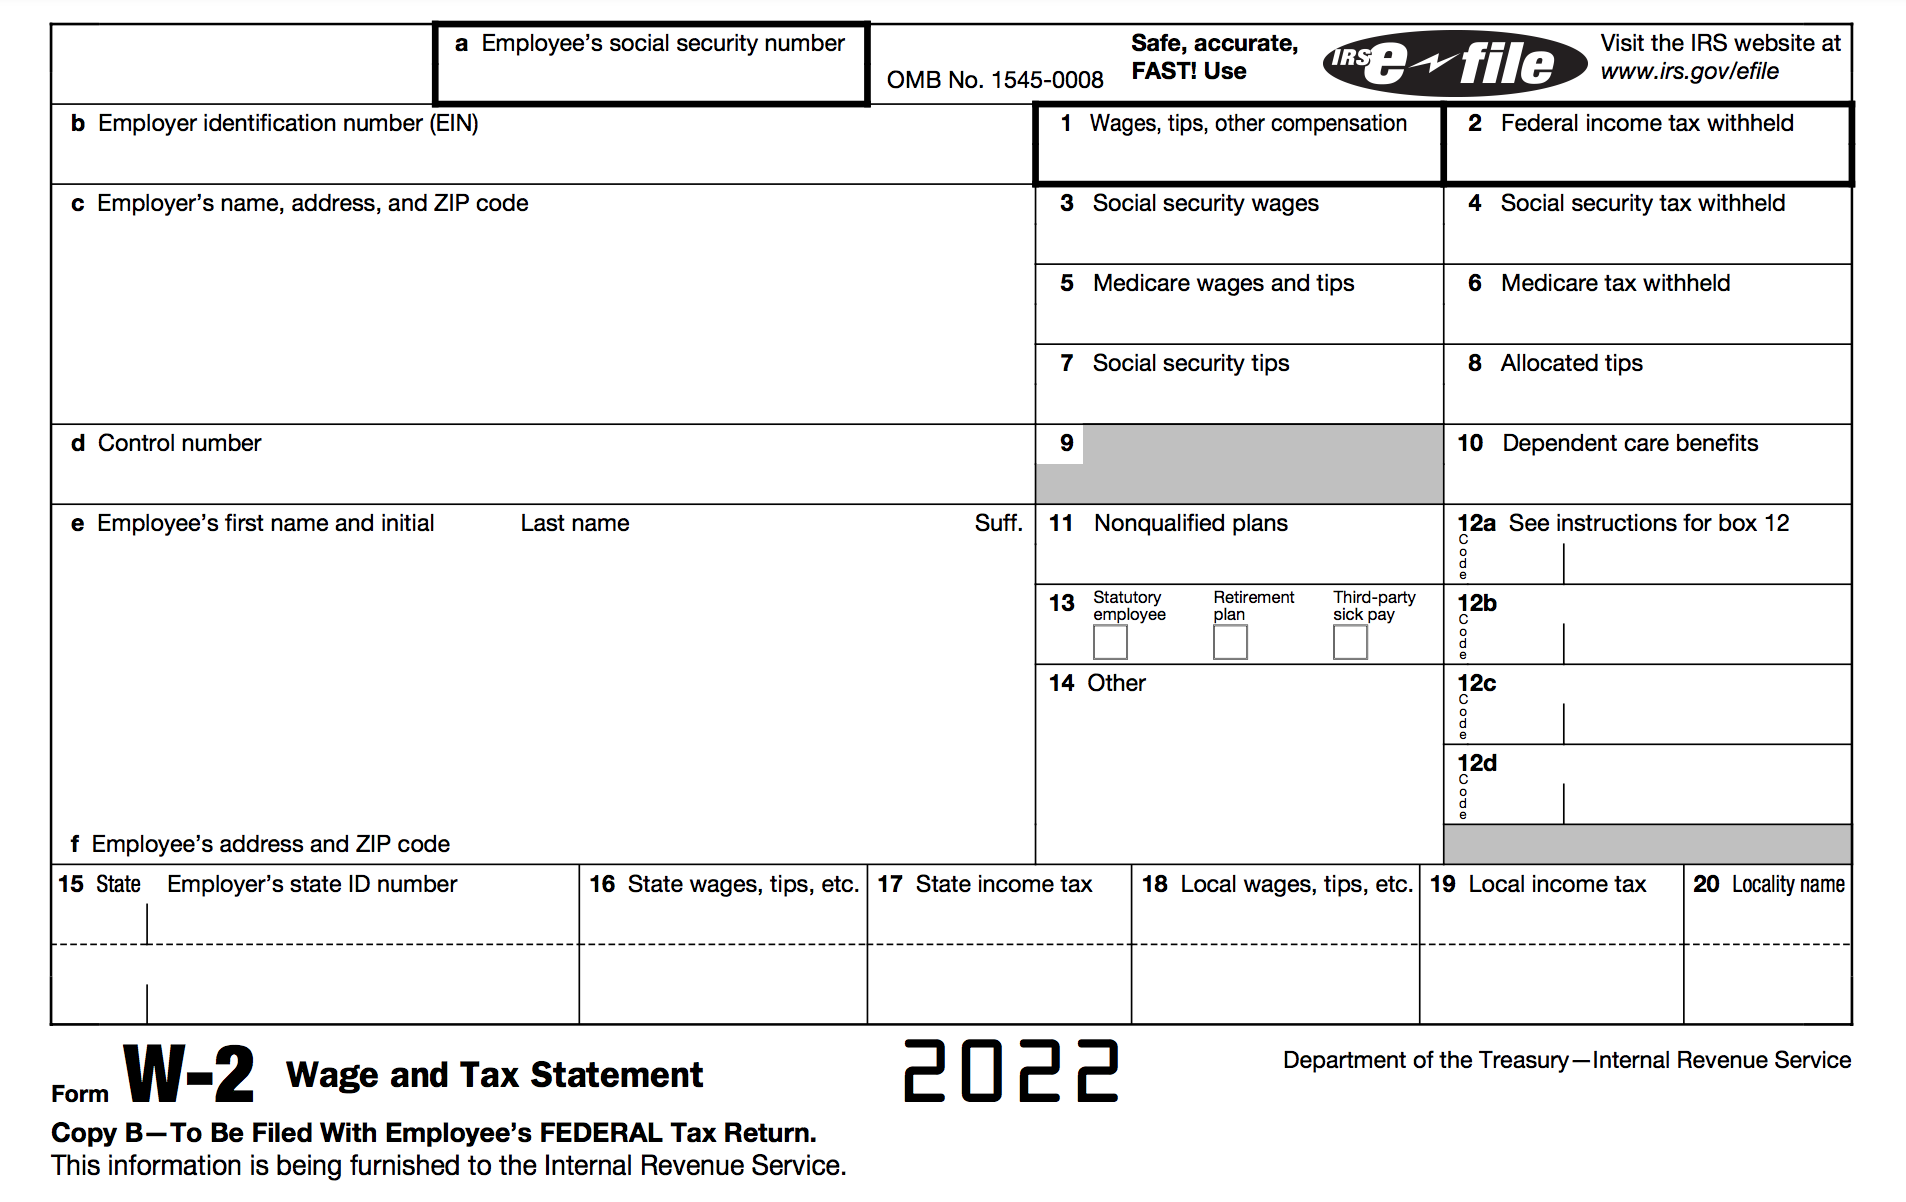 How To Fill Out A W-2 Tax Form | Smartasset in What To Claim On W2 Form